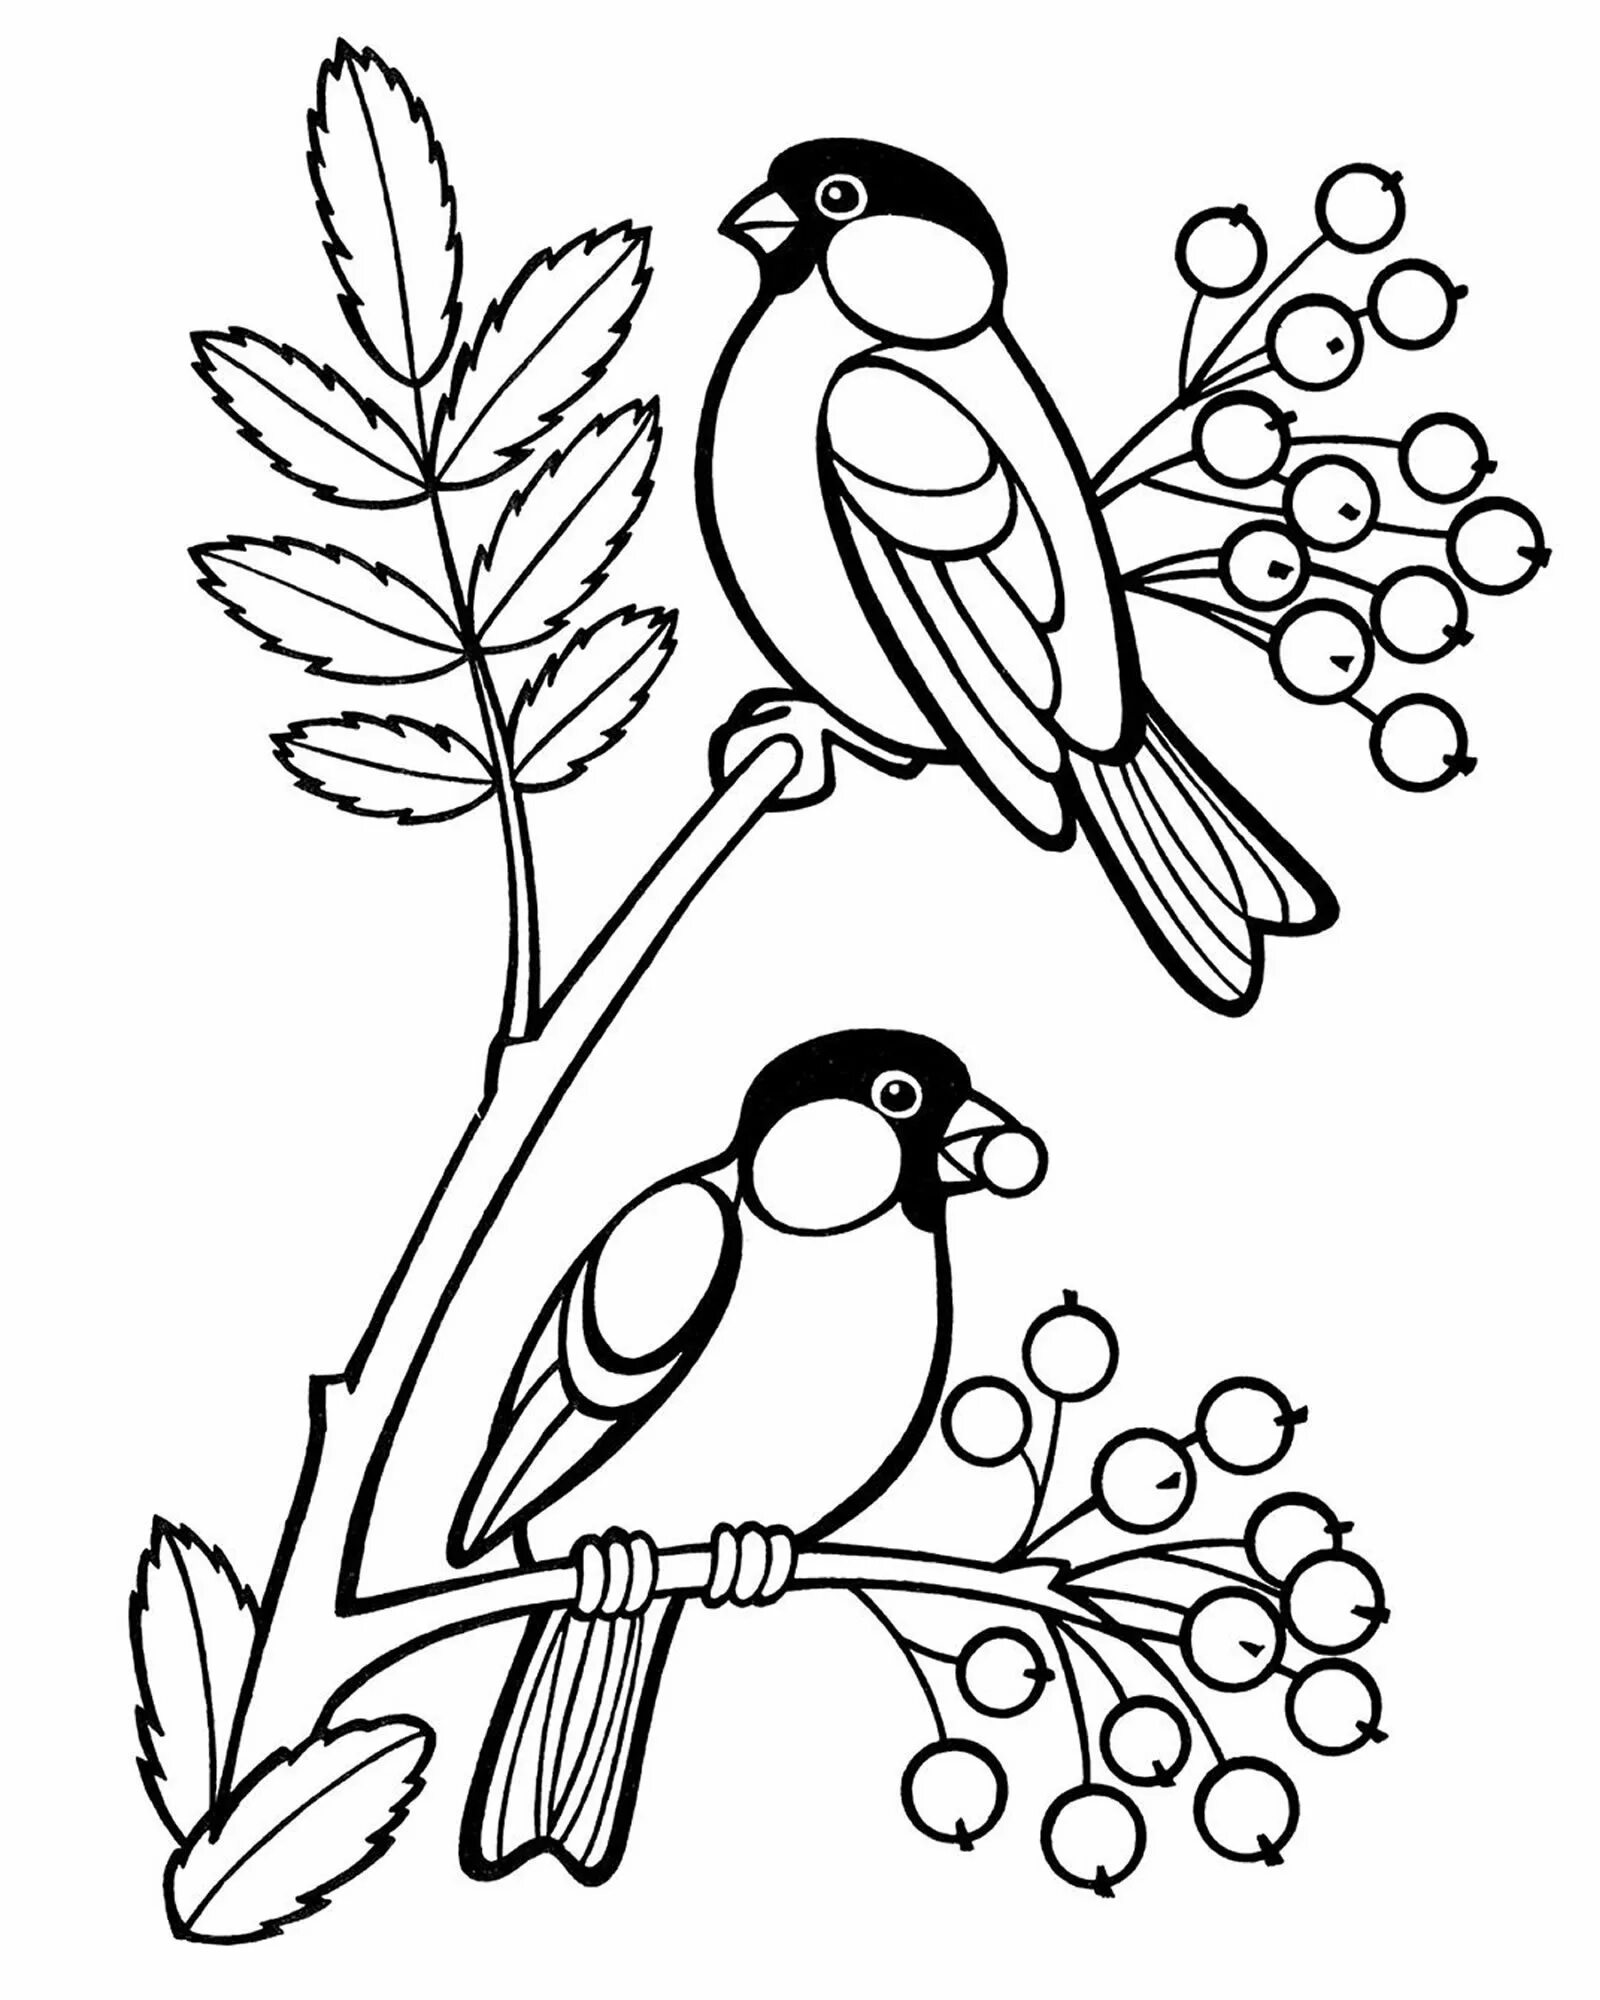 Amazing winter birds coloring book for 3-4 year olds